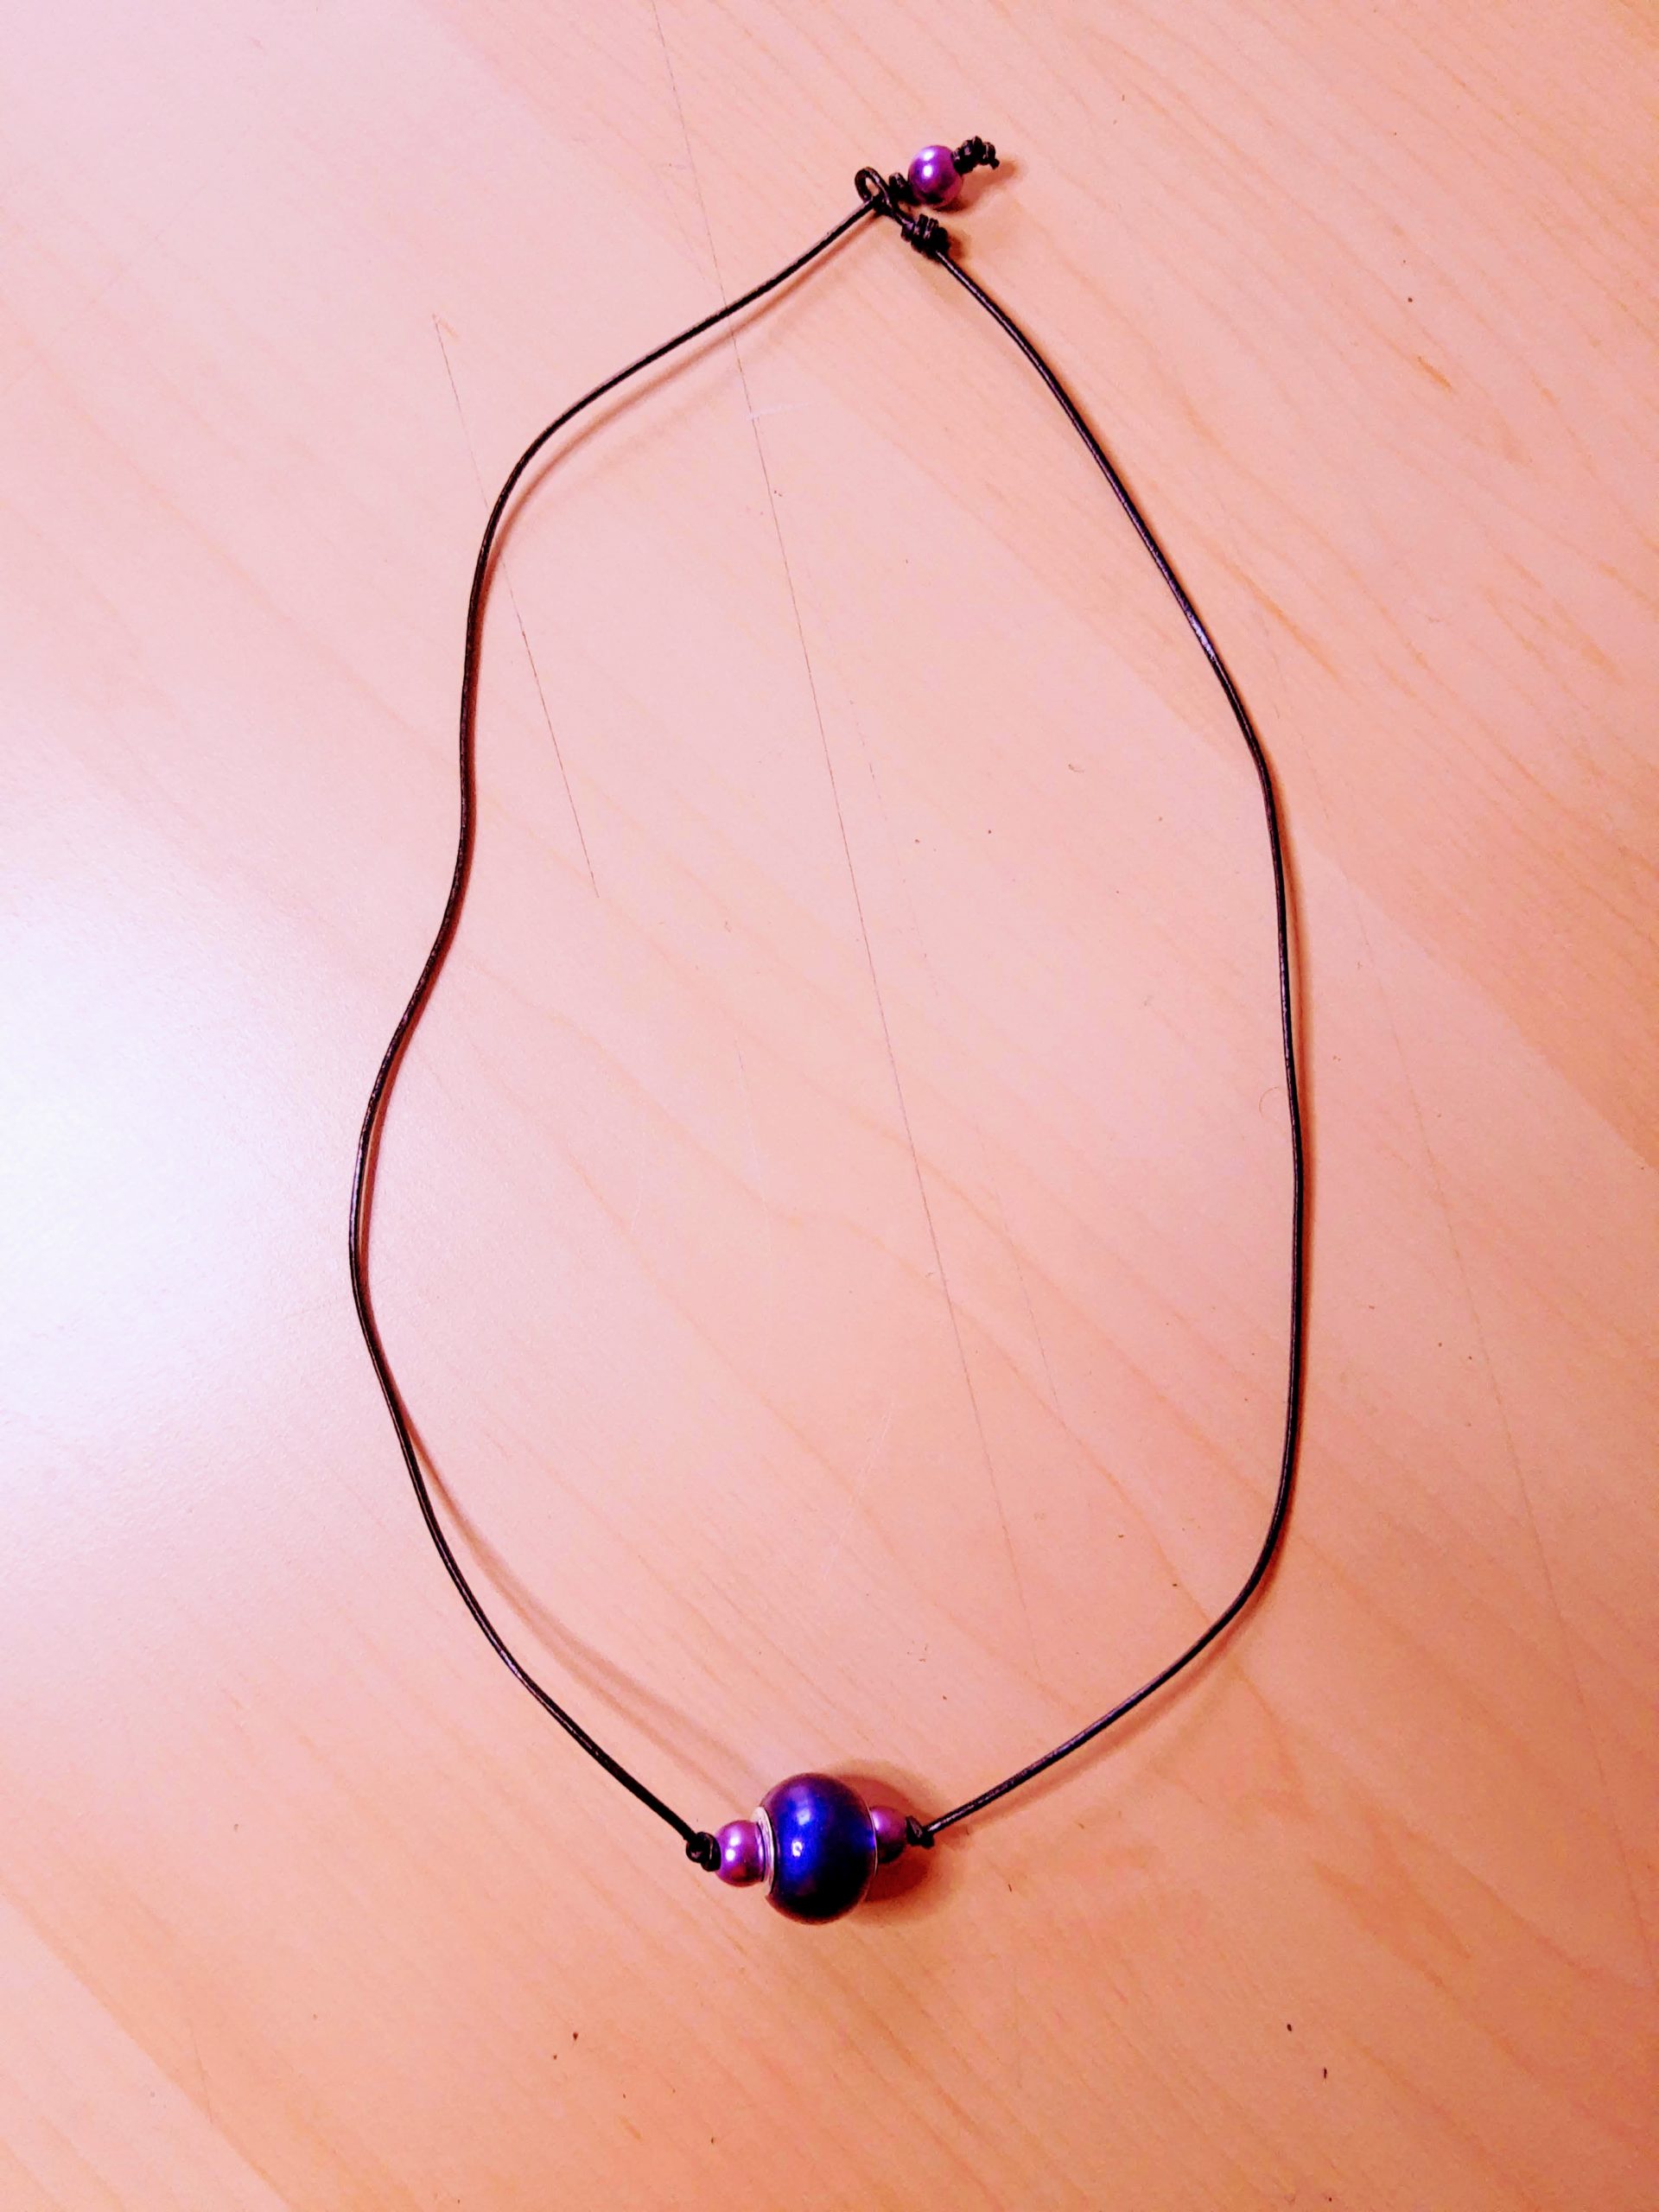 Easy to make leather string necklace